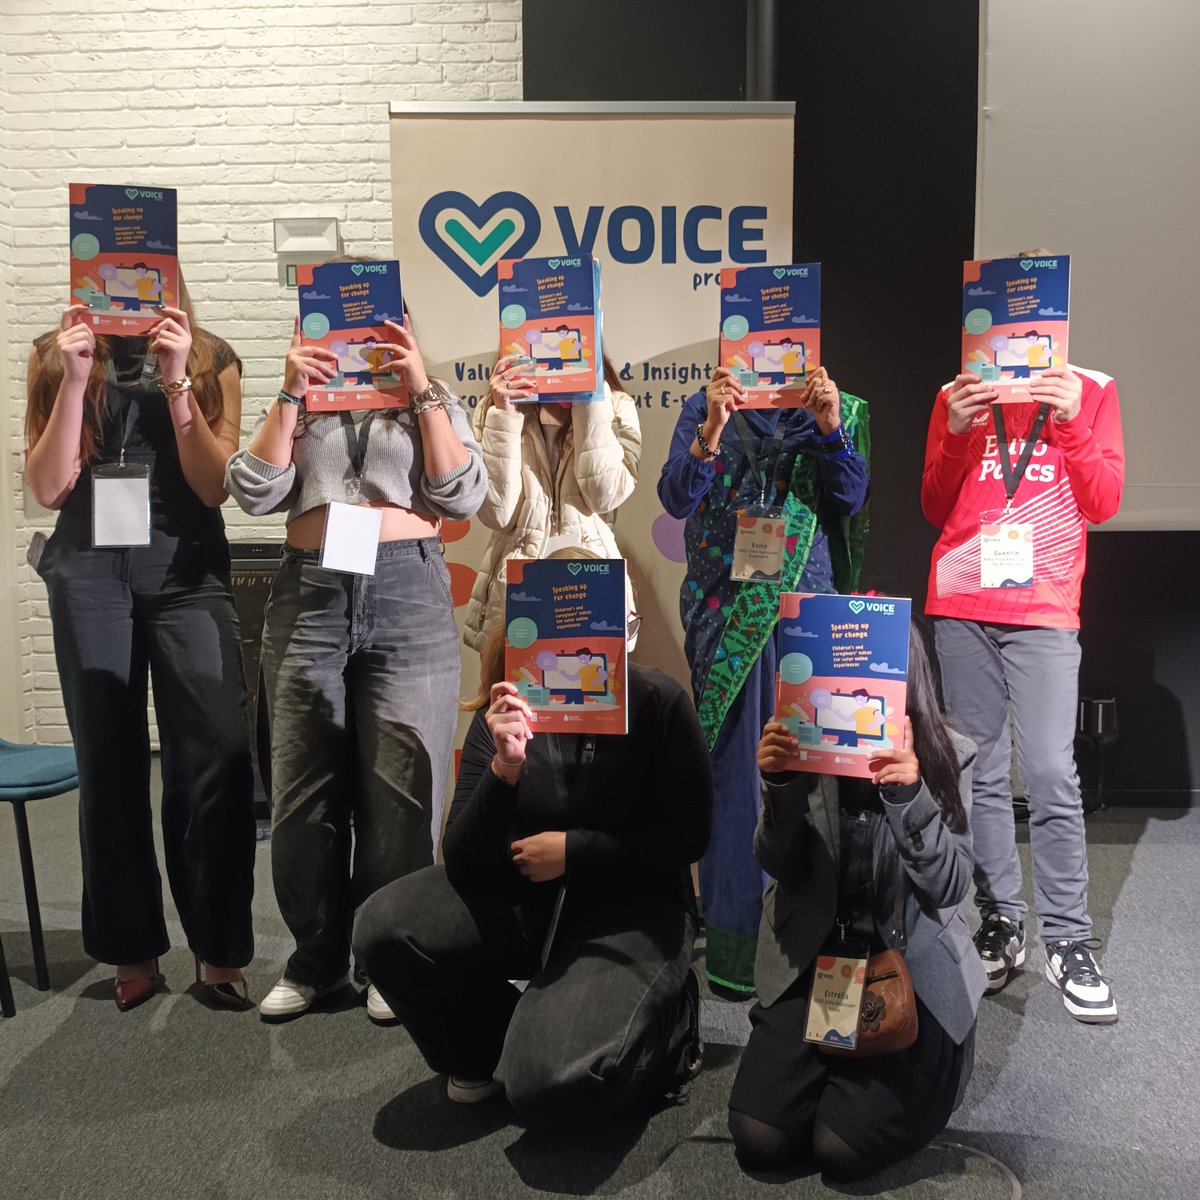 Practise🏃🏾 what you preach 🙌🏾. To keep our VOICE child ambassadors safe online, we are shielding🛡 their identity. The #VOICEResearch report is now available! Read all about the insights on #ChildSafetyOnline from children and their caregivers 👉🏾 bit.ly/VOICEreport